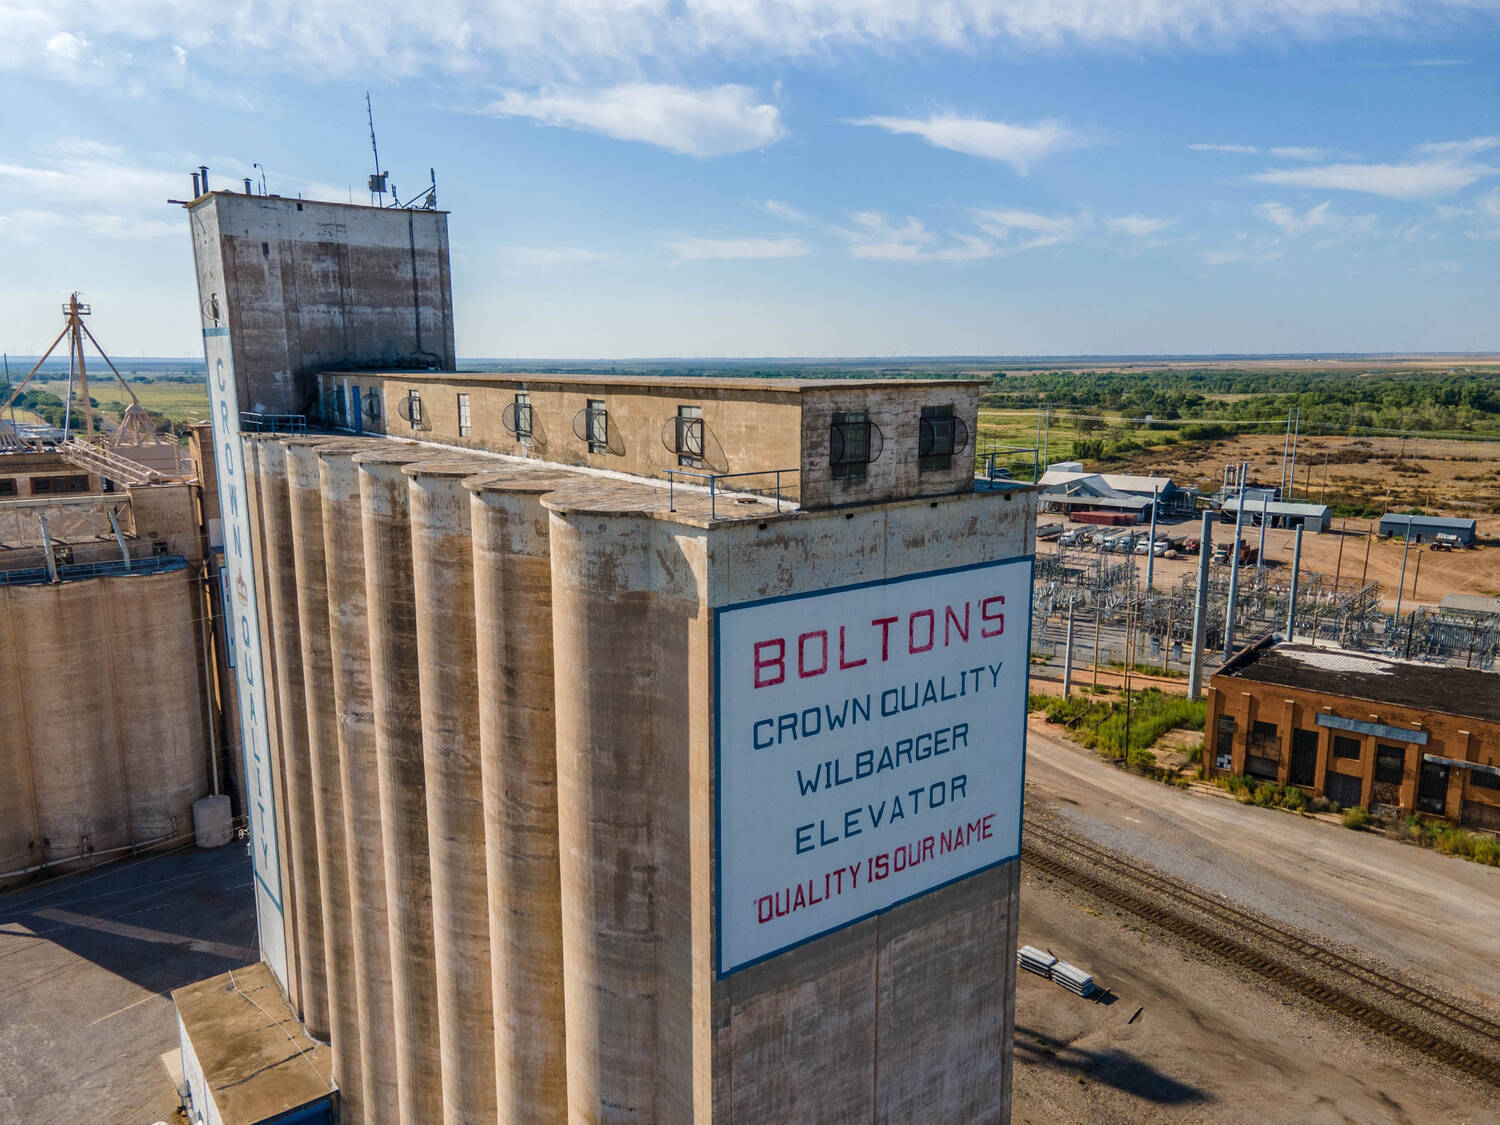 Boltons-Crown-Quality-Feed-Grain-Elevator-Vernon-TX-Wilbarger-County-Republic-Ranches-Bryan-Pickens-18-of-25